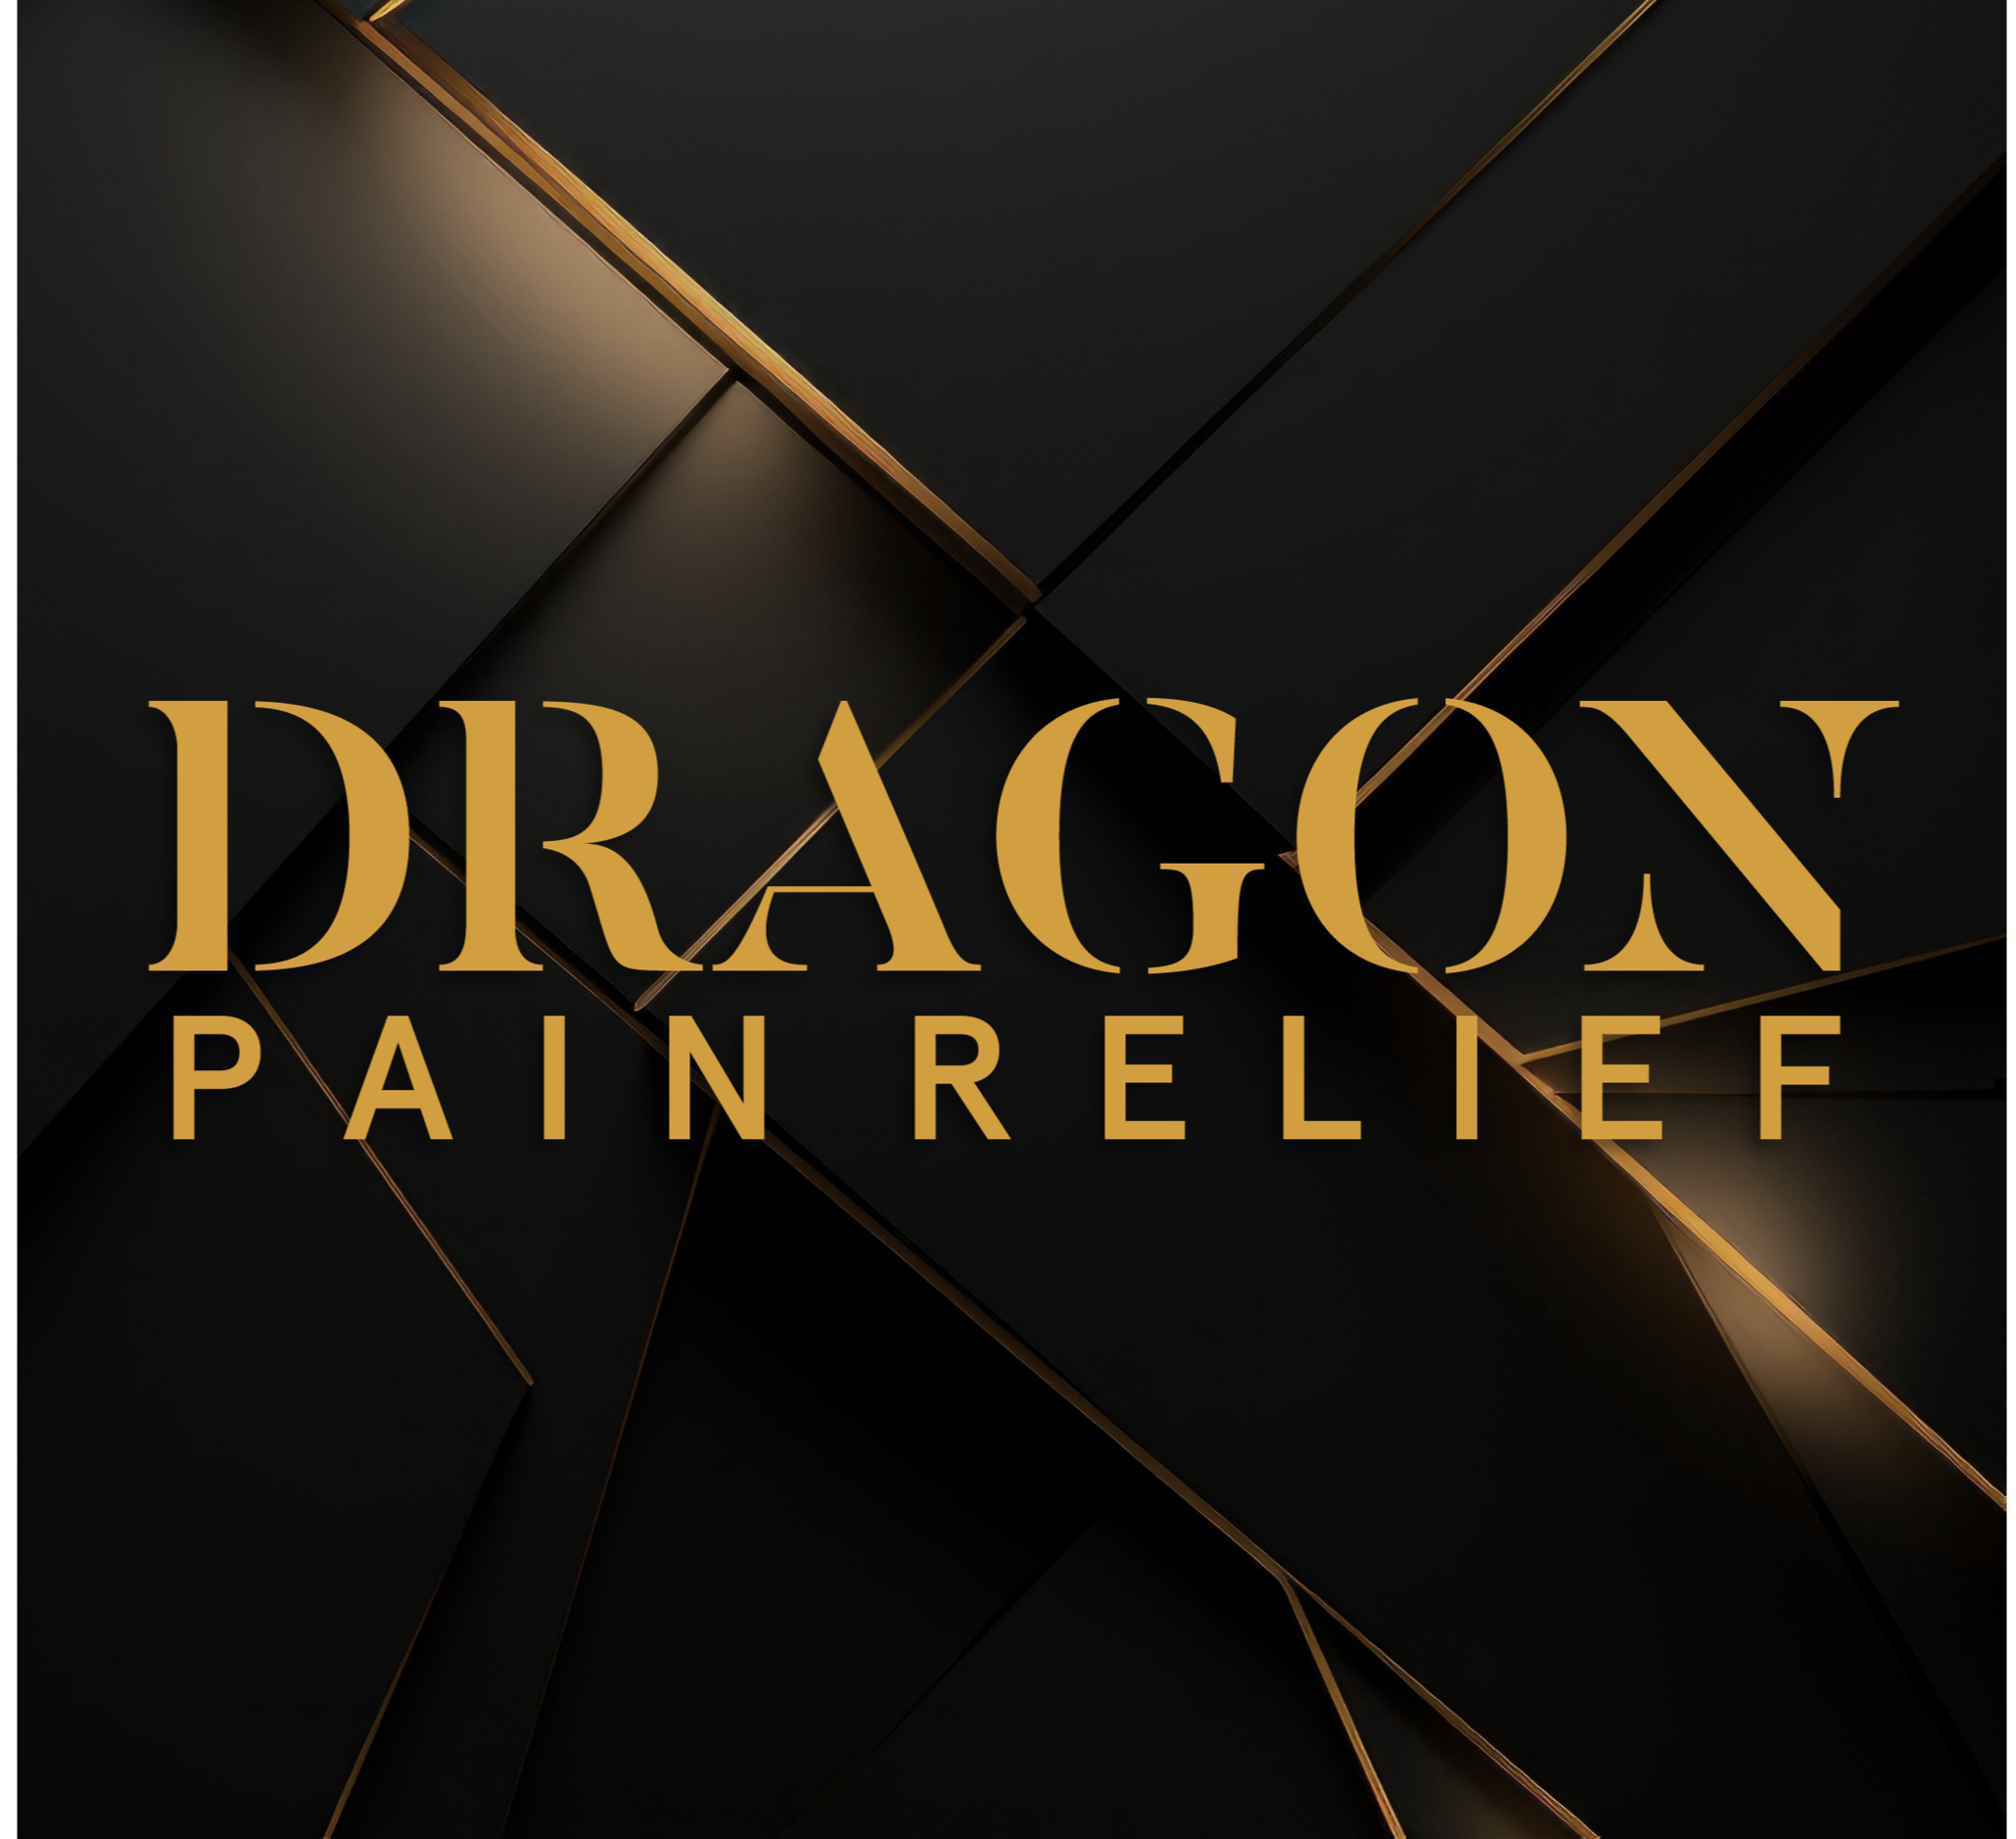 Meet Dragon - The new CBD infused topical pain reliever that is sweeping the market! 126